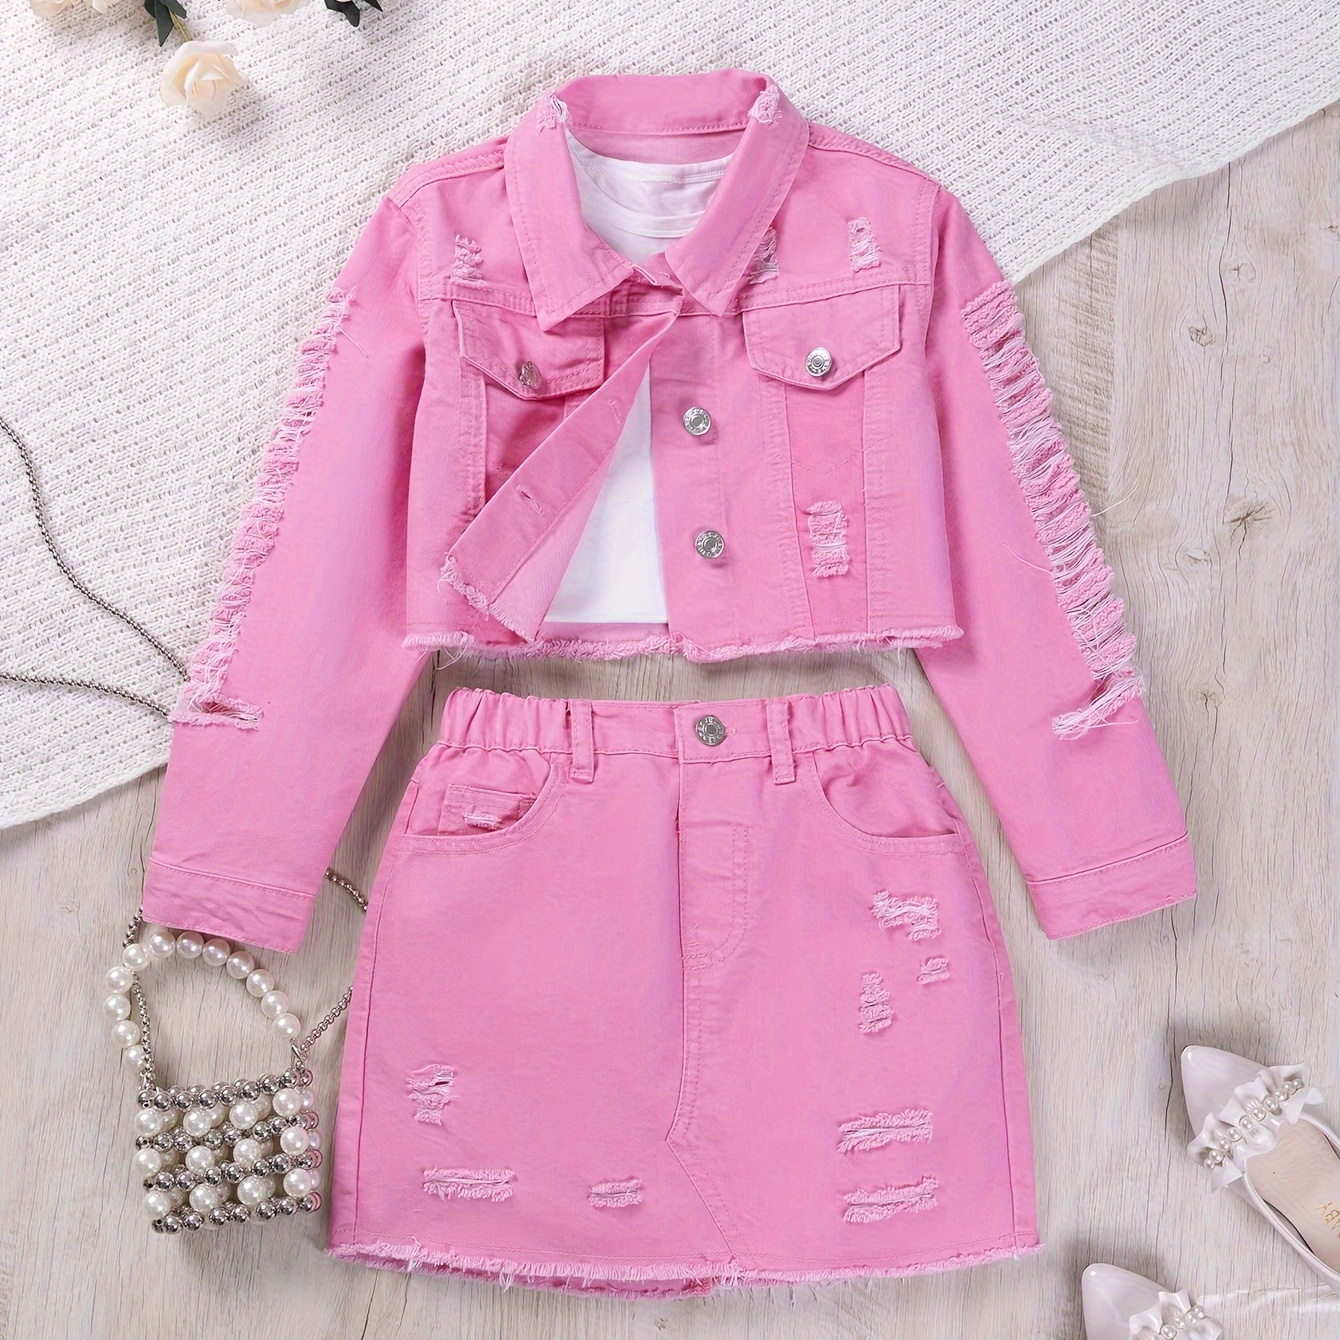 

Girl's 1 Set Ripped Jean Jacket Top + Skirt Co-ords Set, Comfy & Fashion Girls Spring/ Summer Outfit